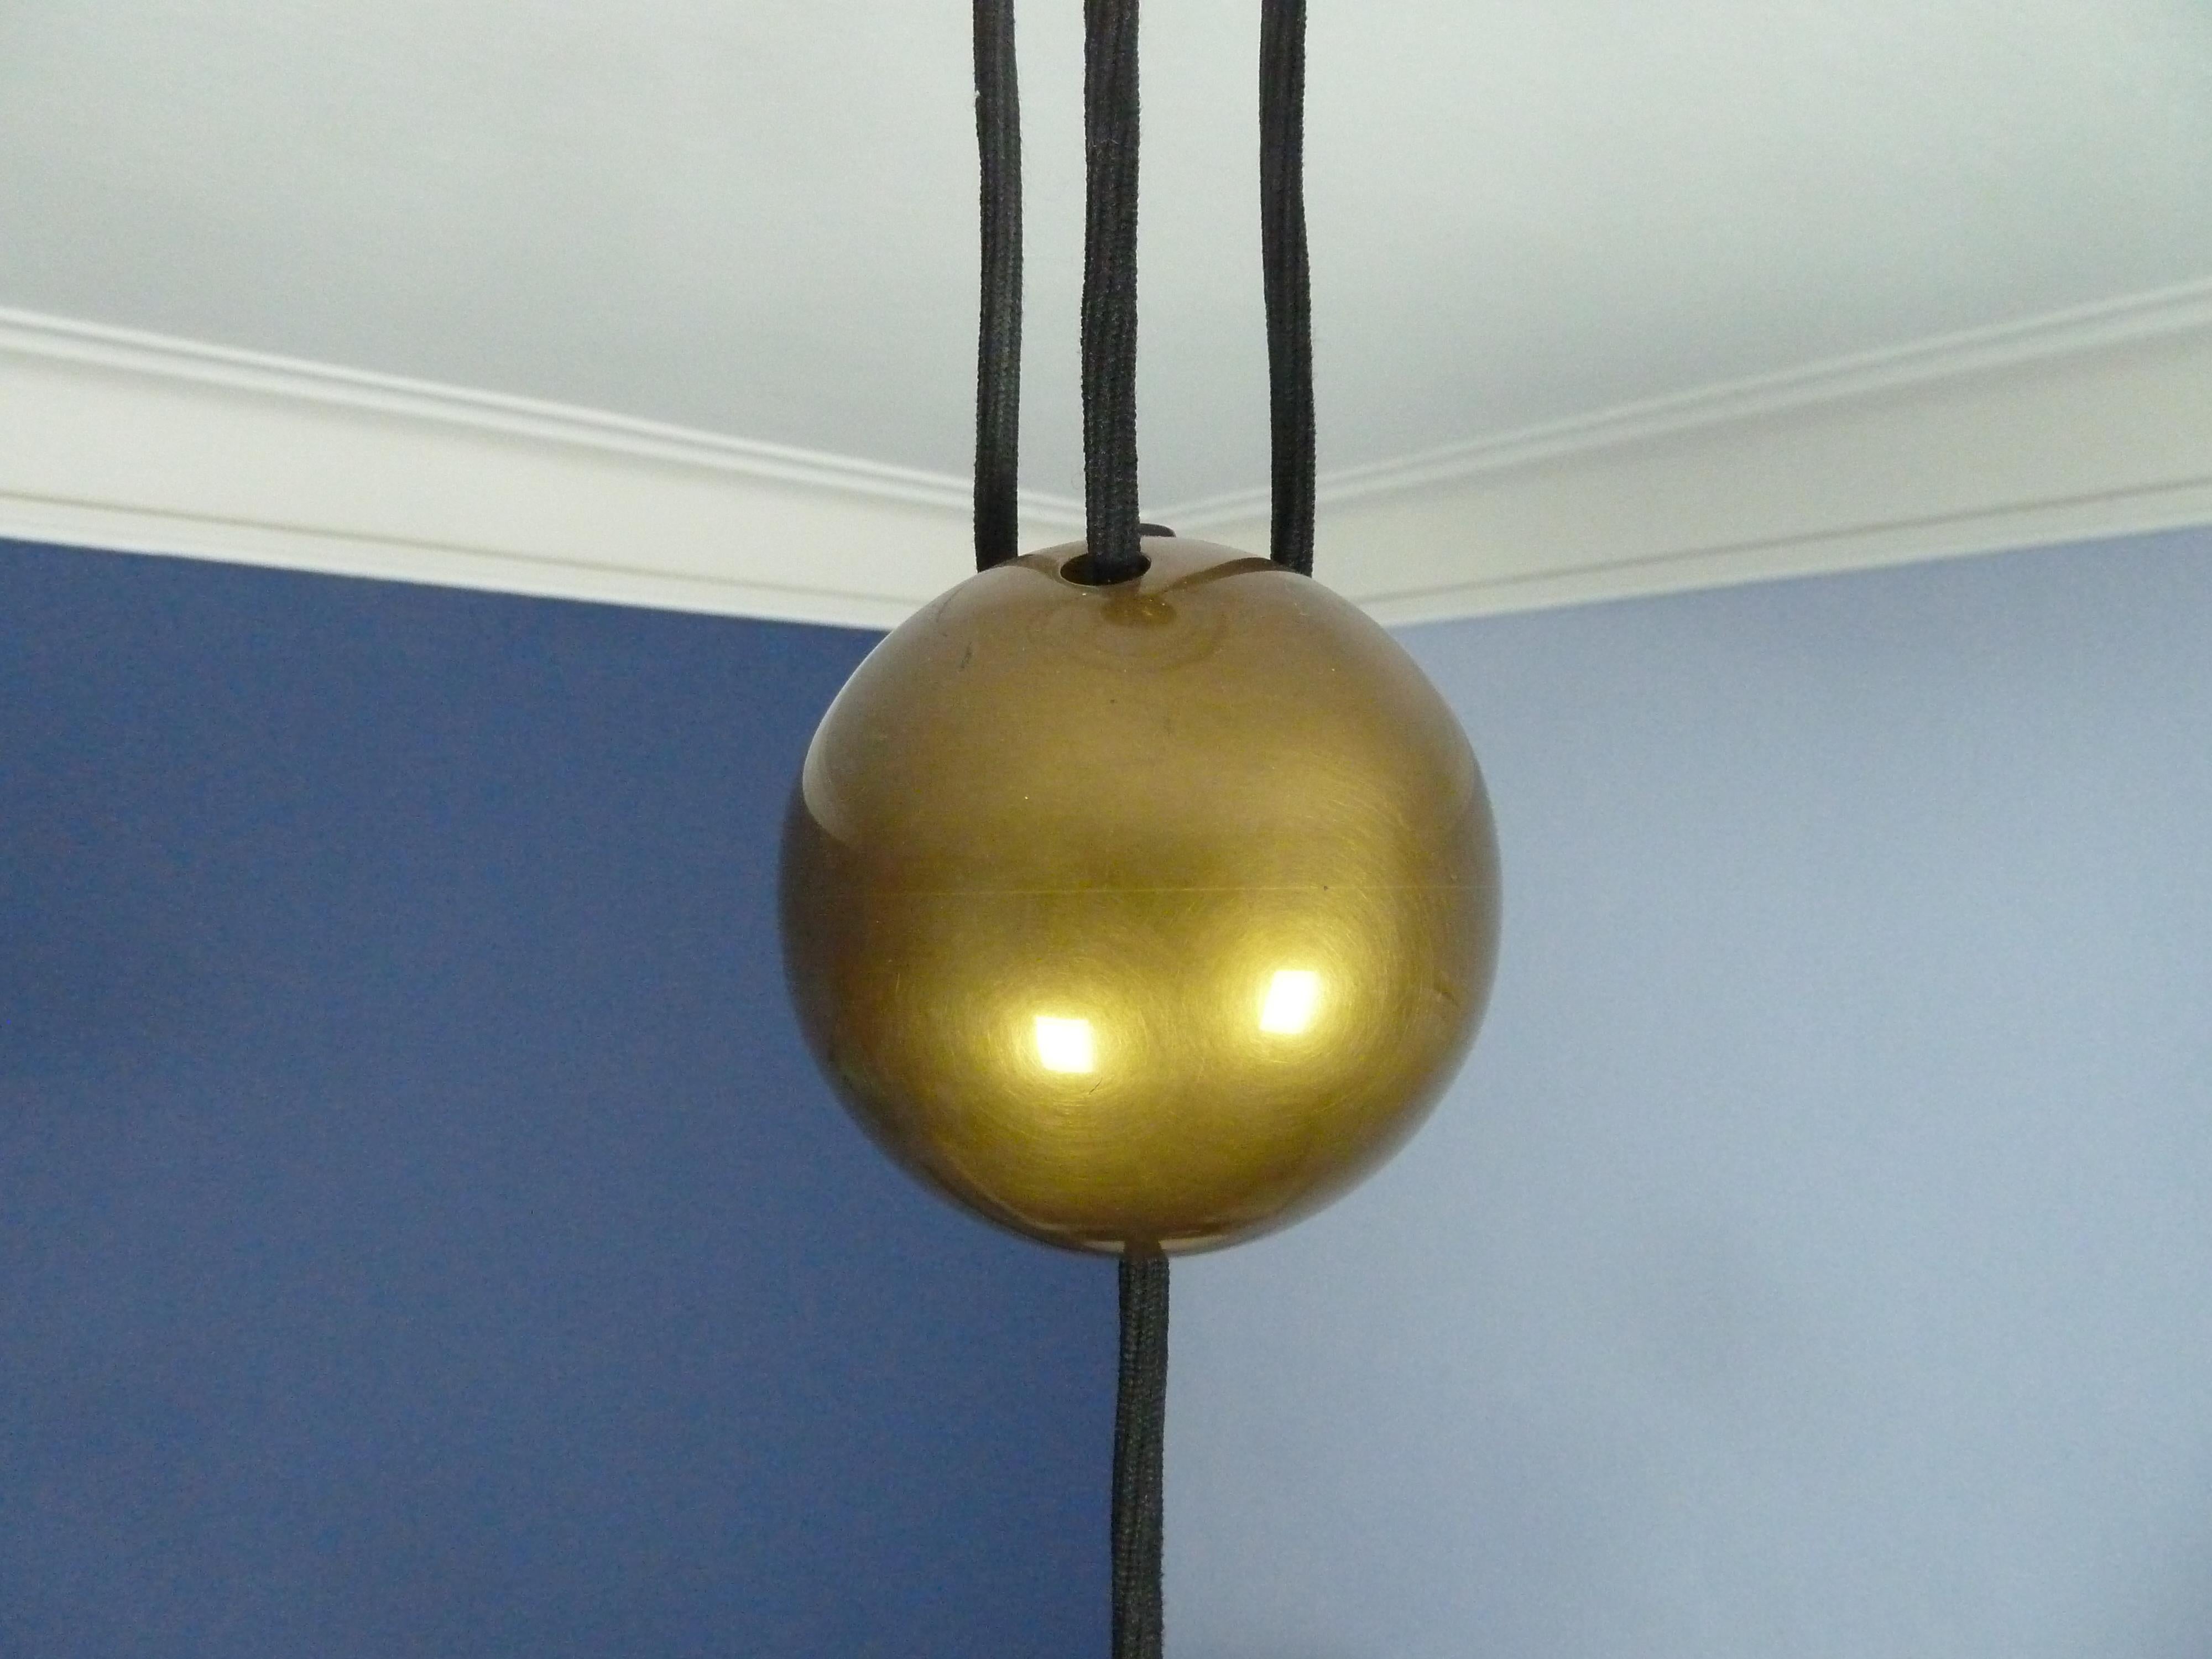 Adjustable Brass Pendant Onos55 by Florian Schulz with a Central Counterweight 2